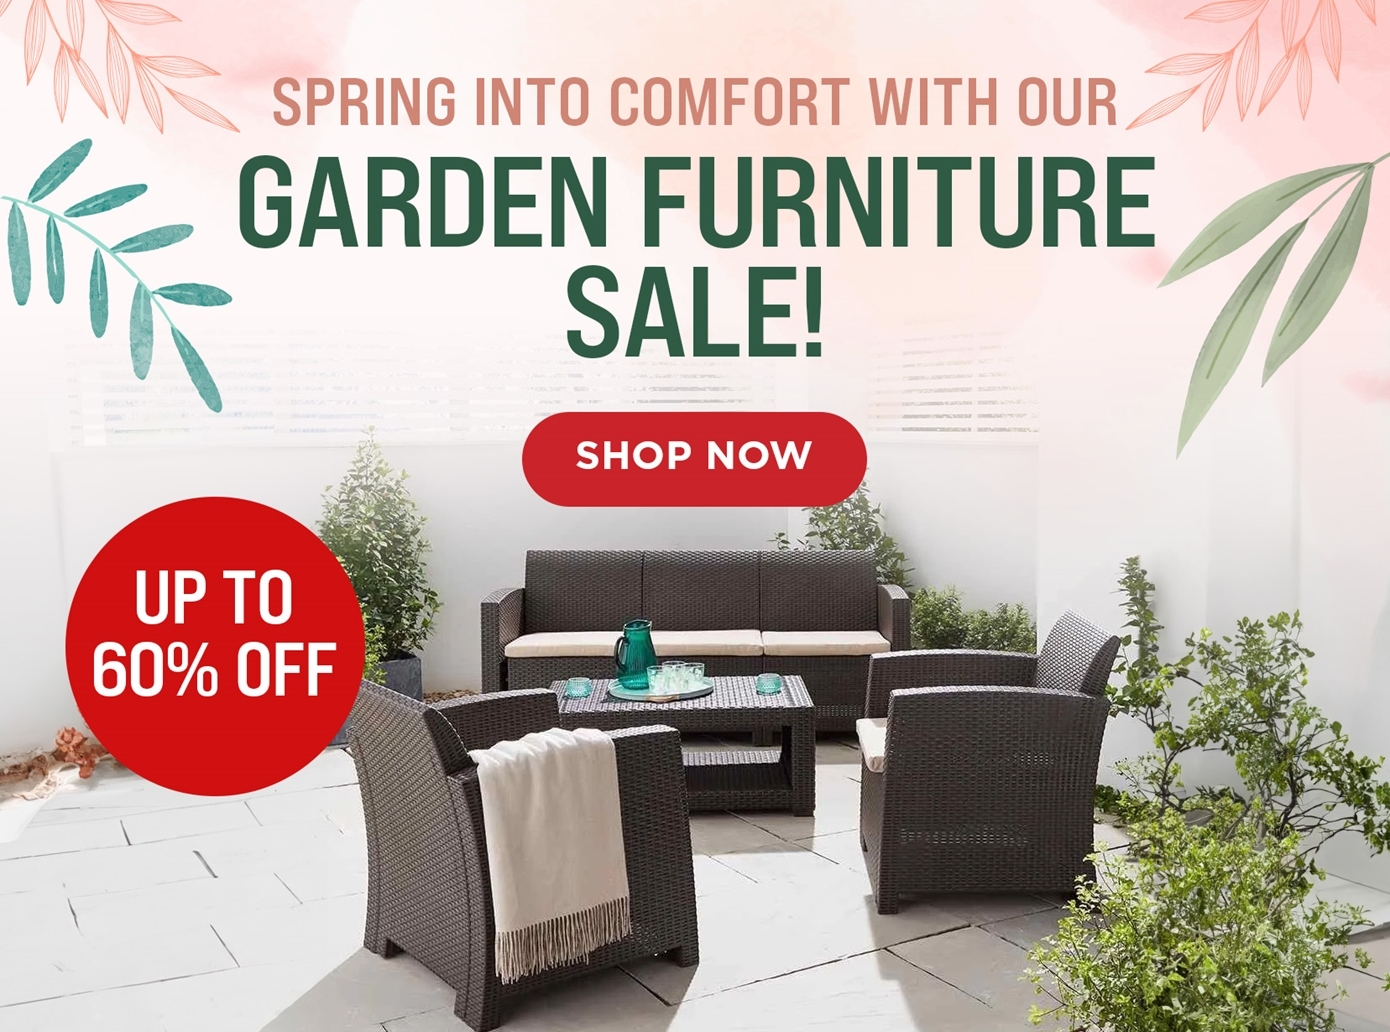 garden furniture sale save up to 60% off